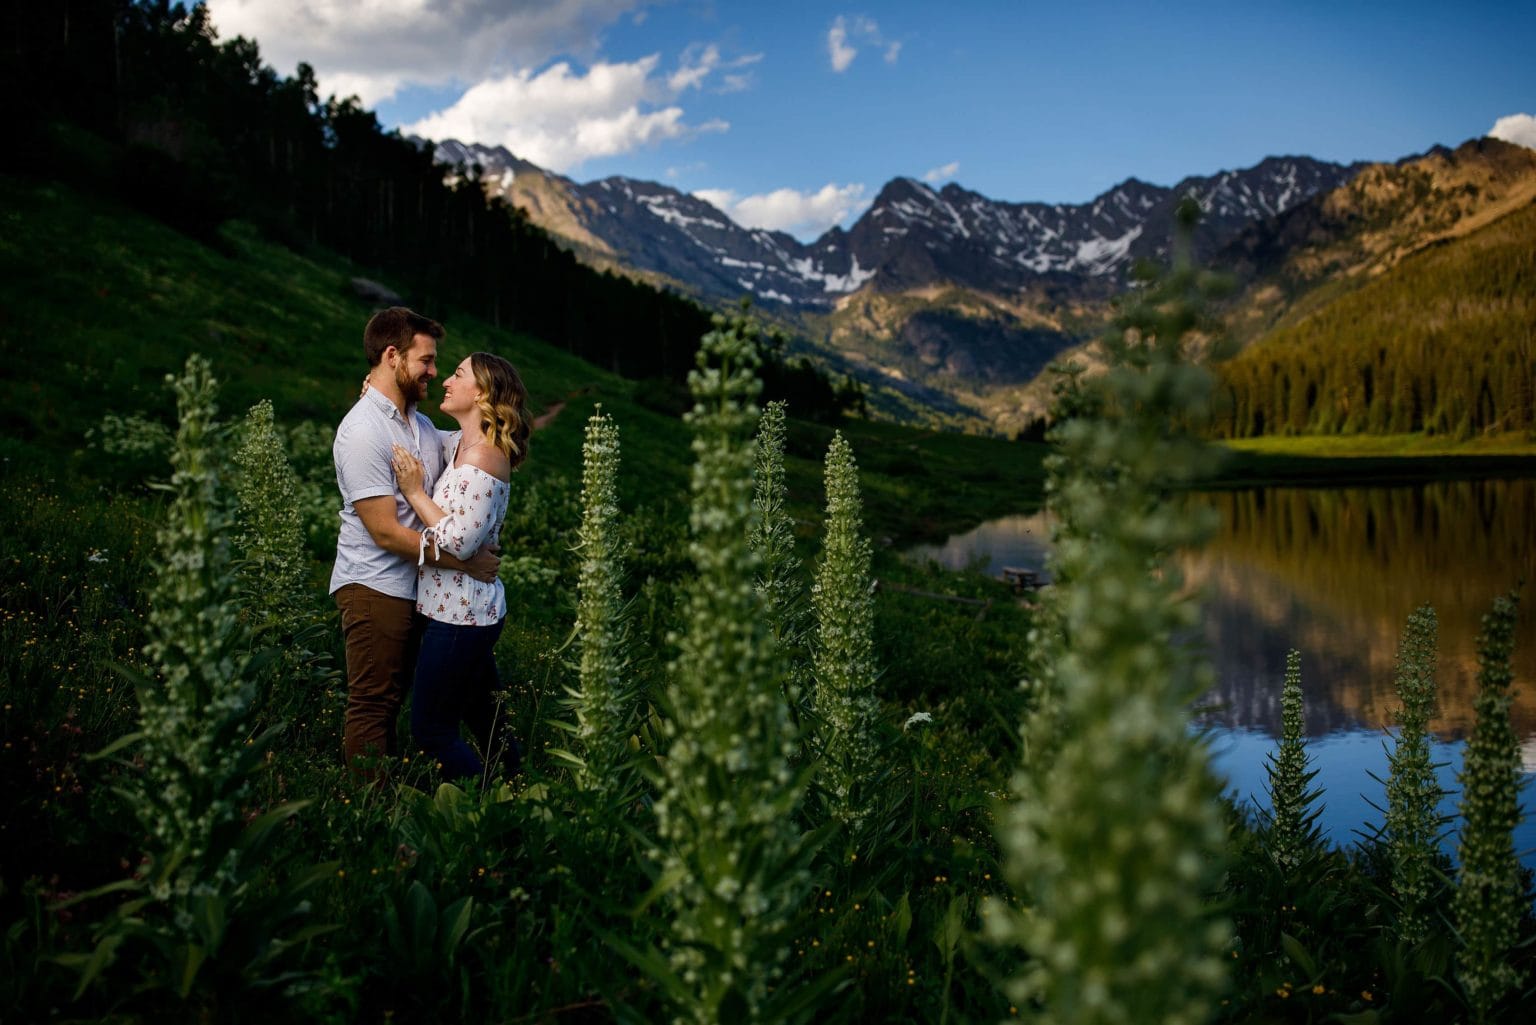 Ryan and Laura embrace during their engagement session at Piney Lake near Vail, Colorado